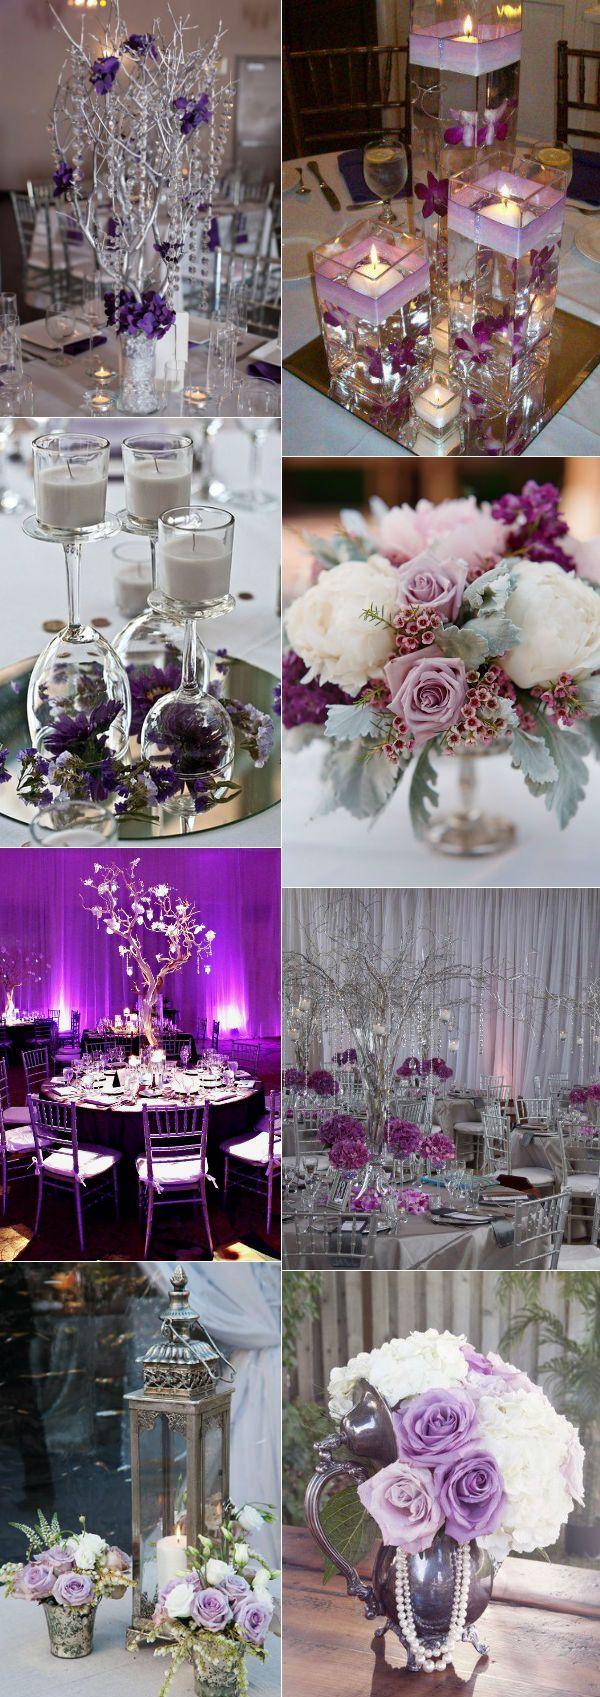 Hochzeit - Stunning Wedding Color Ideas In Shades Of Purple And Silver